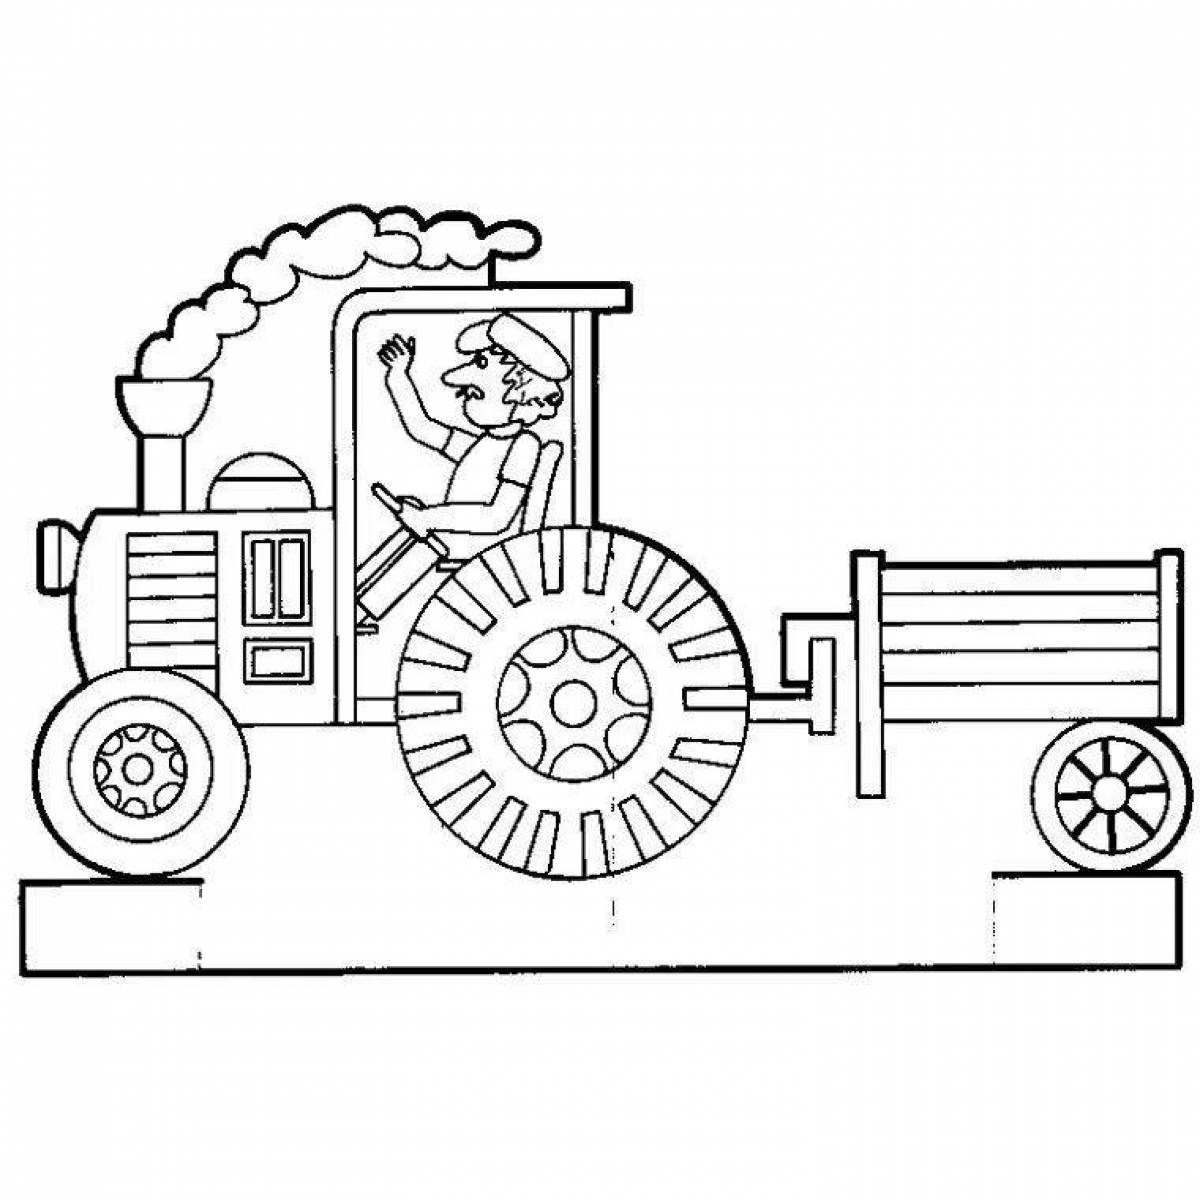 Coloring book glowing tractor with a barrel